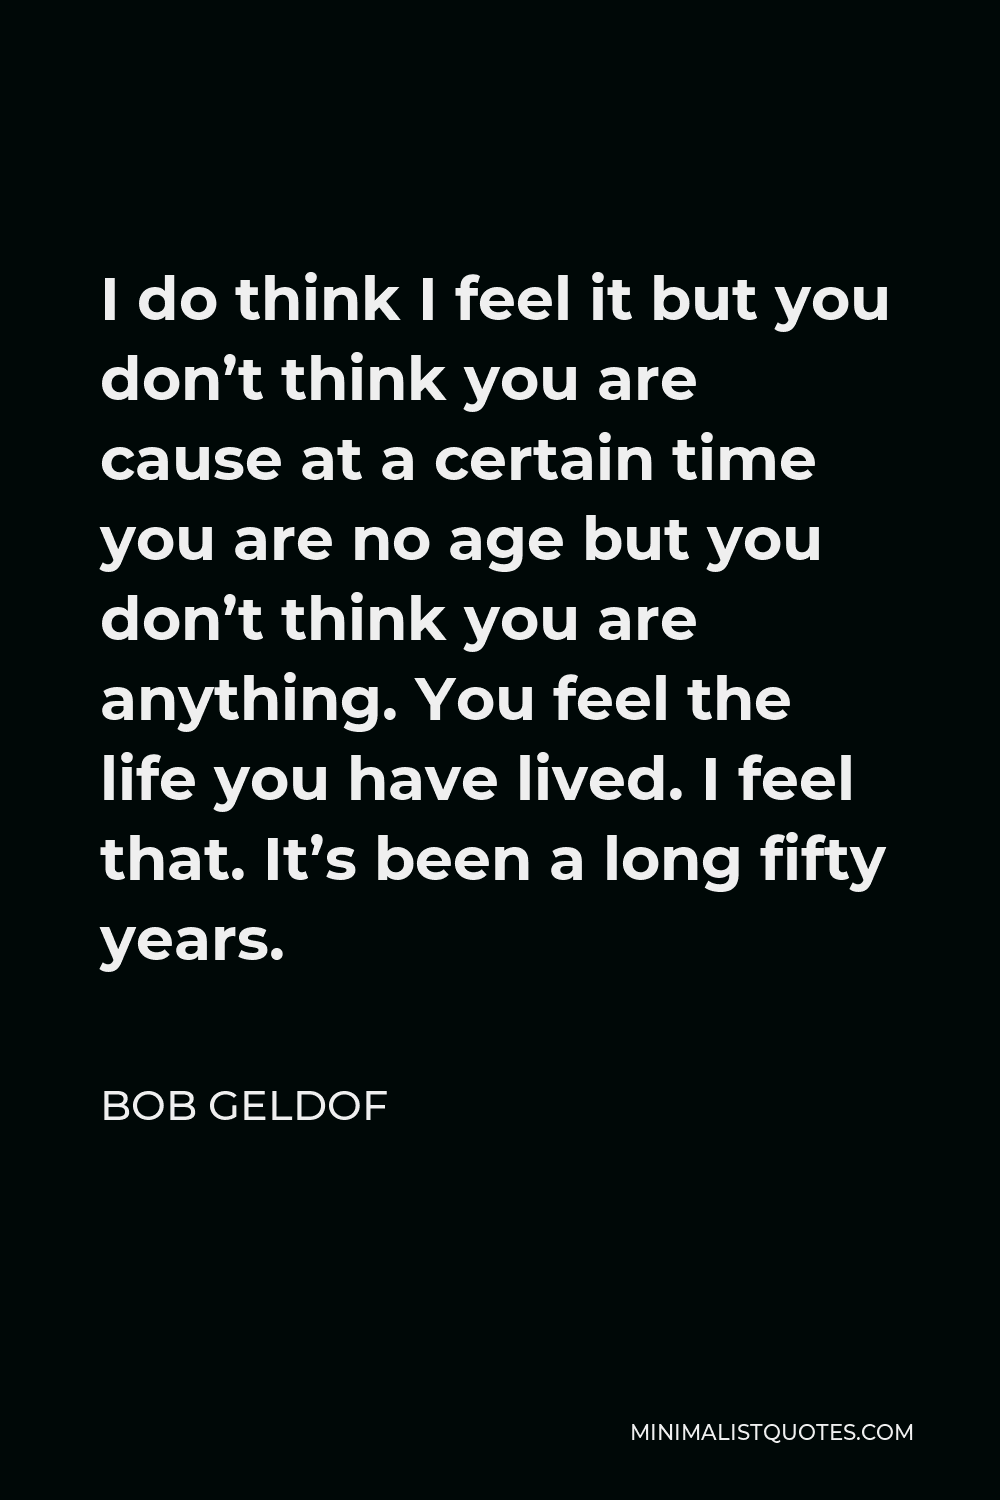 Bob Geldof Quote - I do think I feel it but you don’t think you are cause at a certain time you are no age but you don’t think you are anything. You feel the life you have lived. I feel that. It’s been a long fifty years.